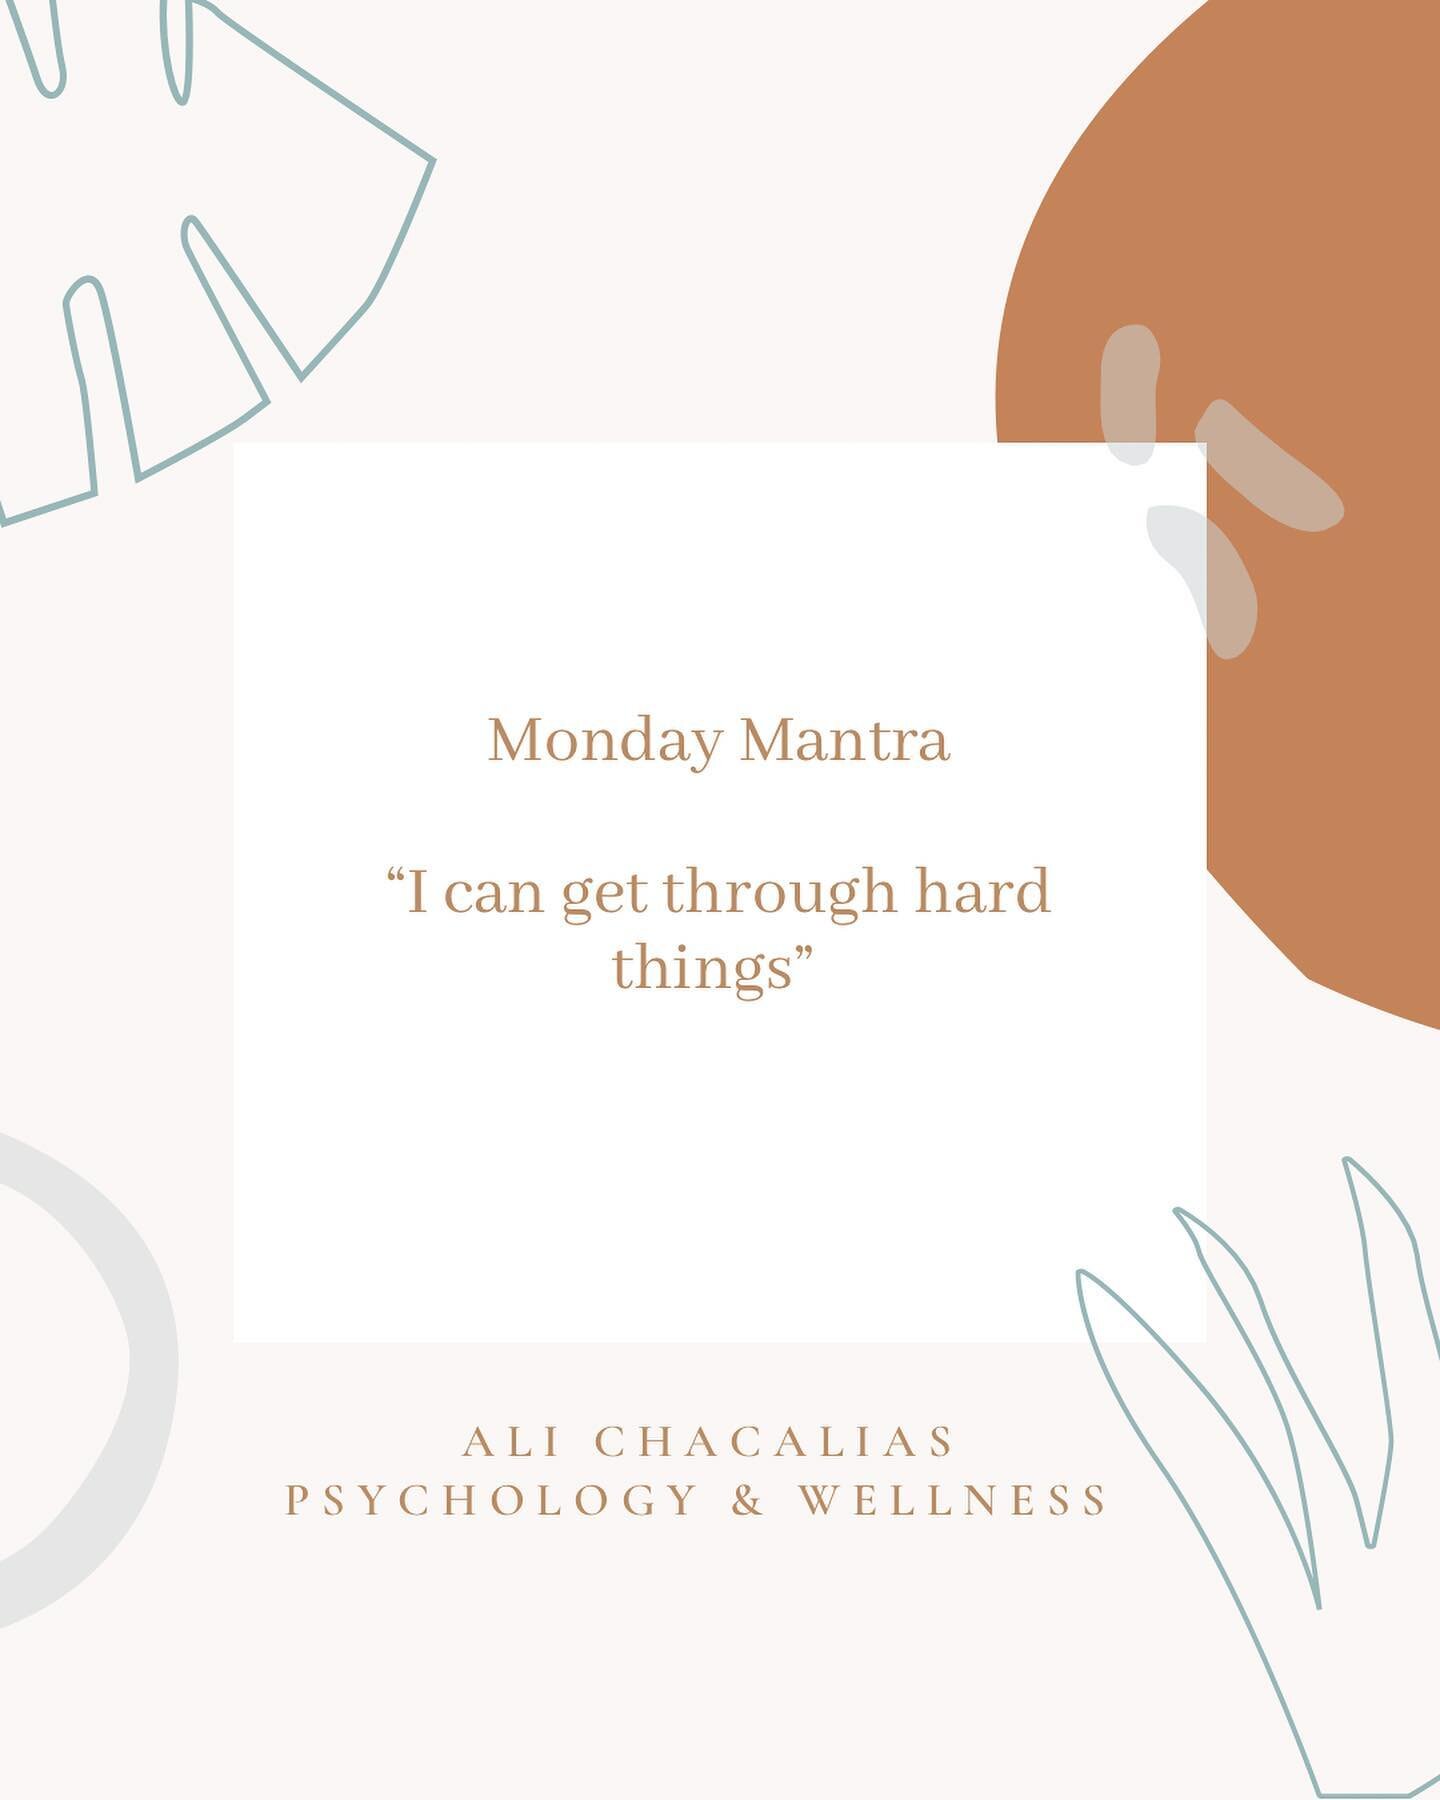 Monday mantraaa✨

Research shows that self-affirmations, or as I call them on Mondays, mantras, help us change habits and patterns. What mantra will you choose to guide your week?
&bull;
&bull;
&bull;
#wellness #selflove #selfcompassion #selfcare #we